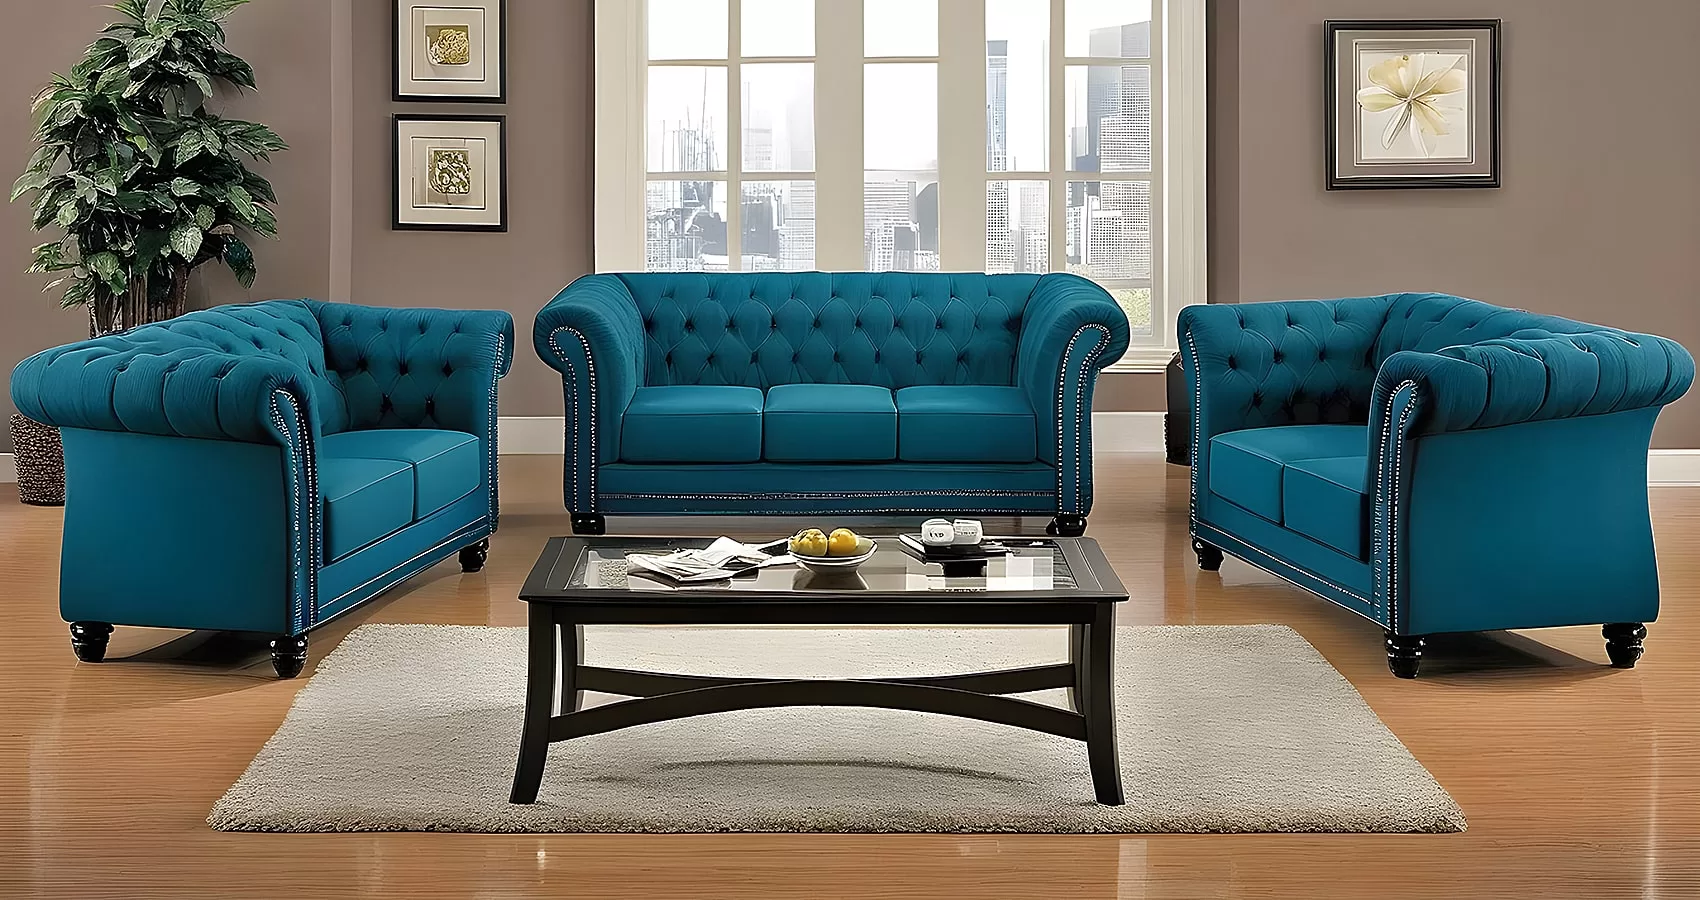 Blue Couch and Loveseat Set | Blue Sofa with Loveseat